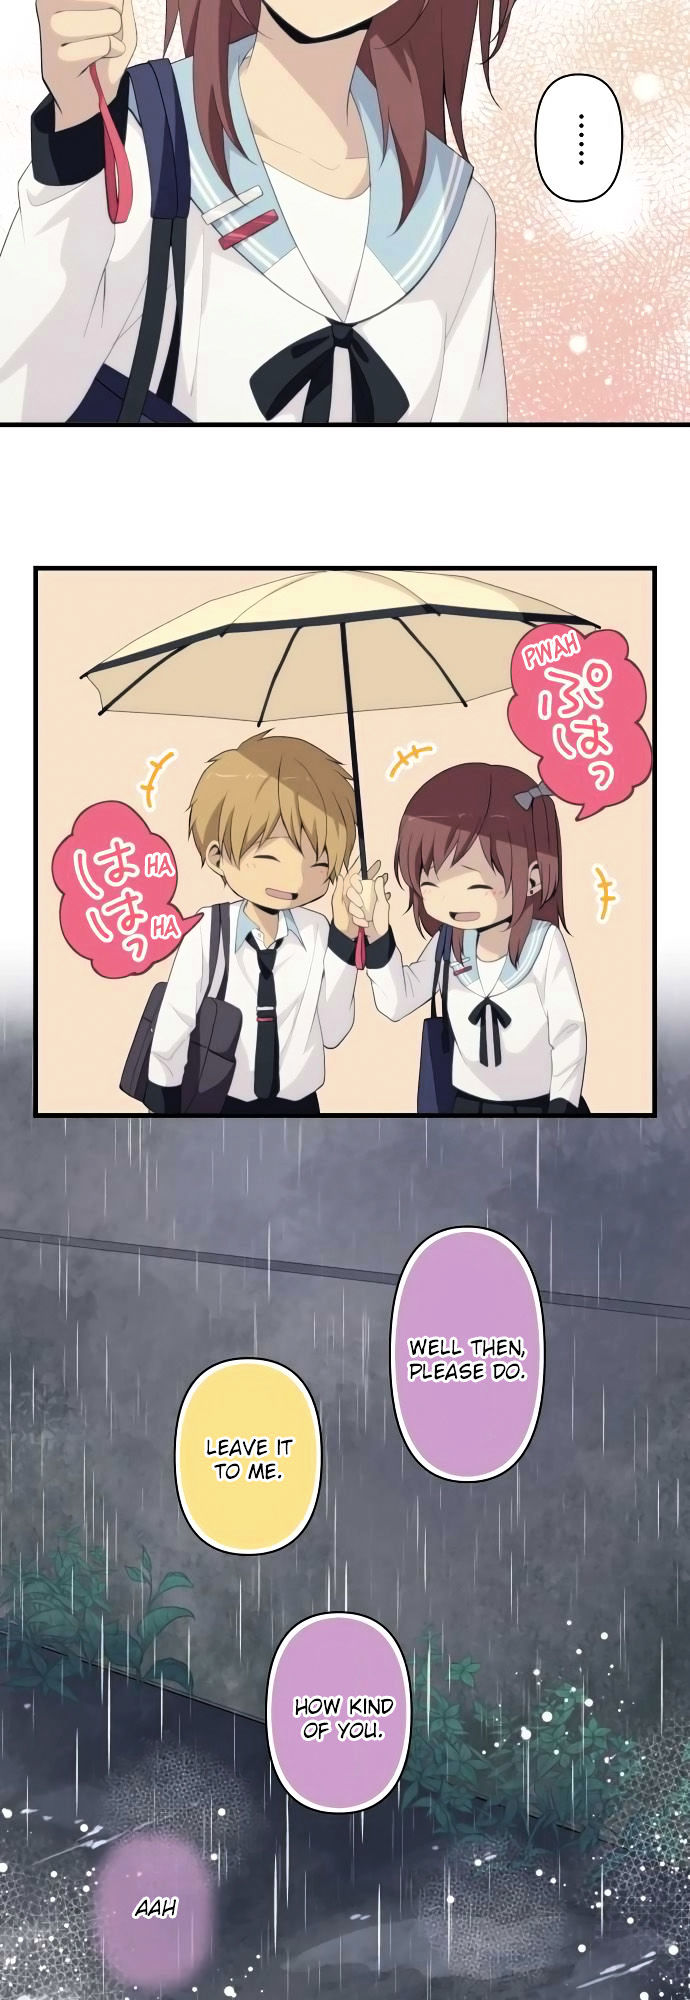 Relife 164 13